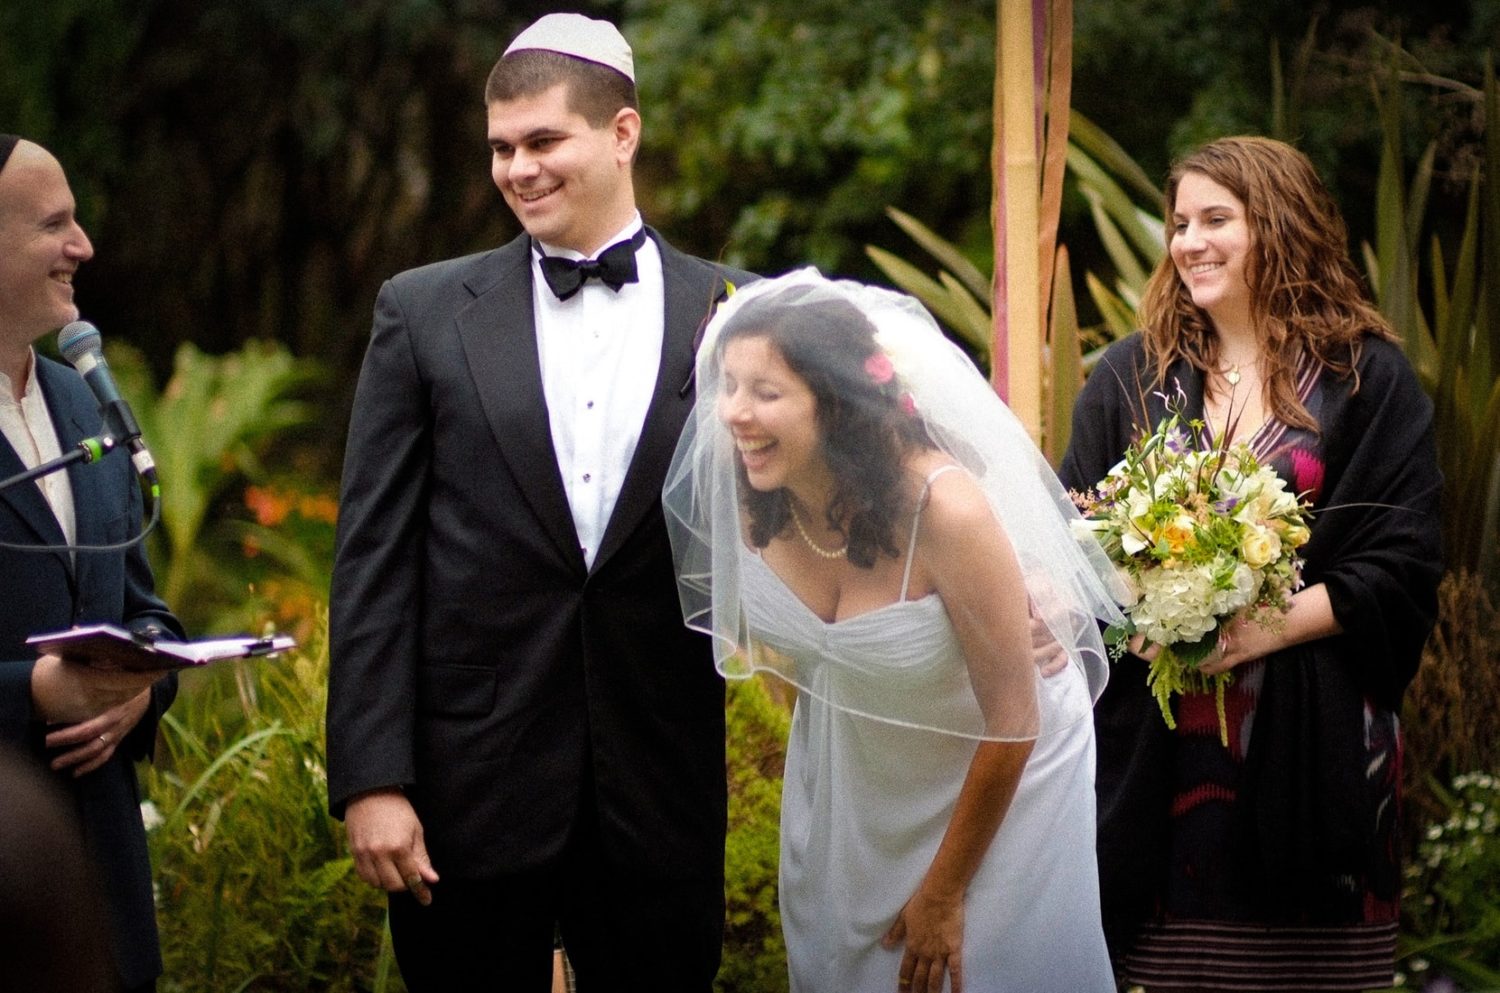 A groom wearing a suit and tie standing next to his bride wearing her wedding dress and veil under the chuppah at their Jewish Wedding